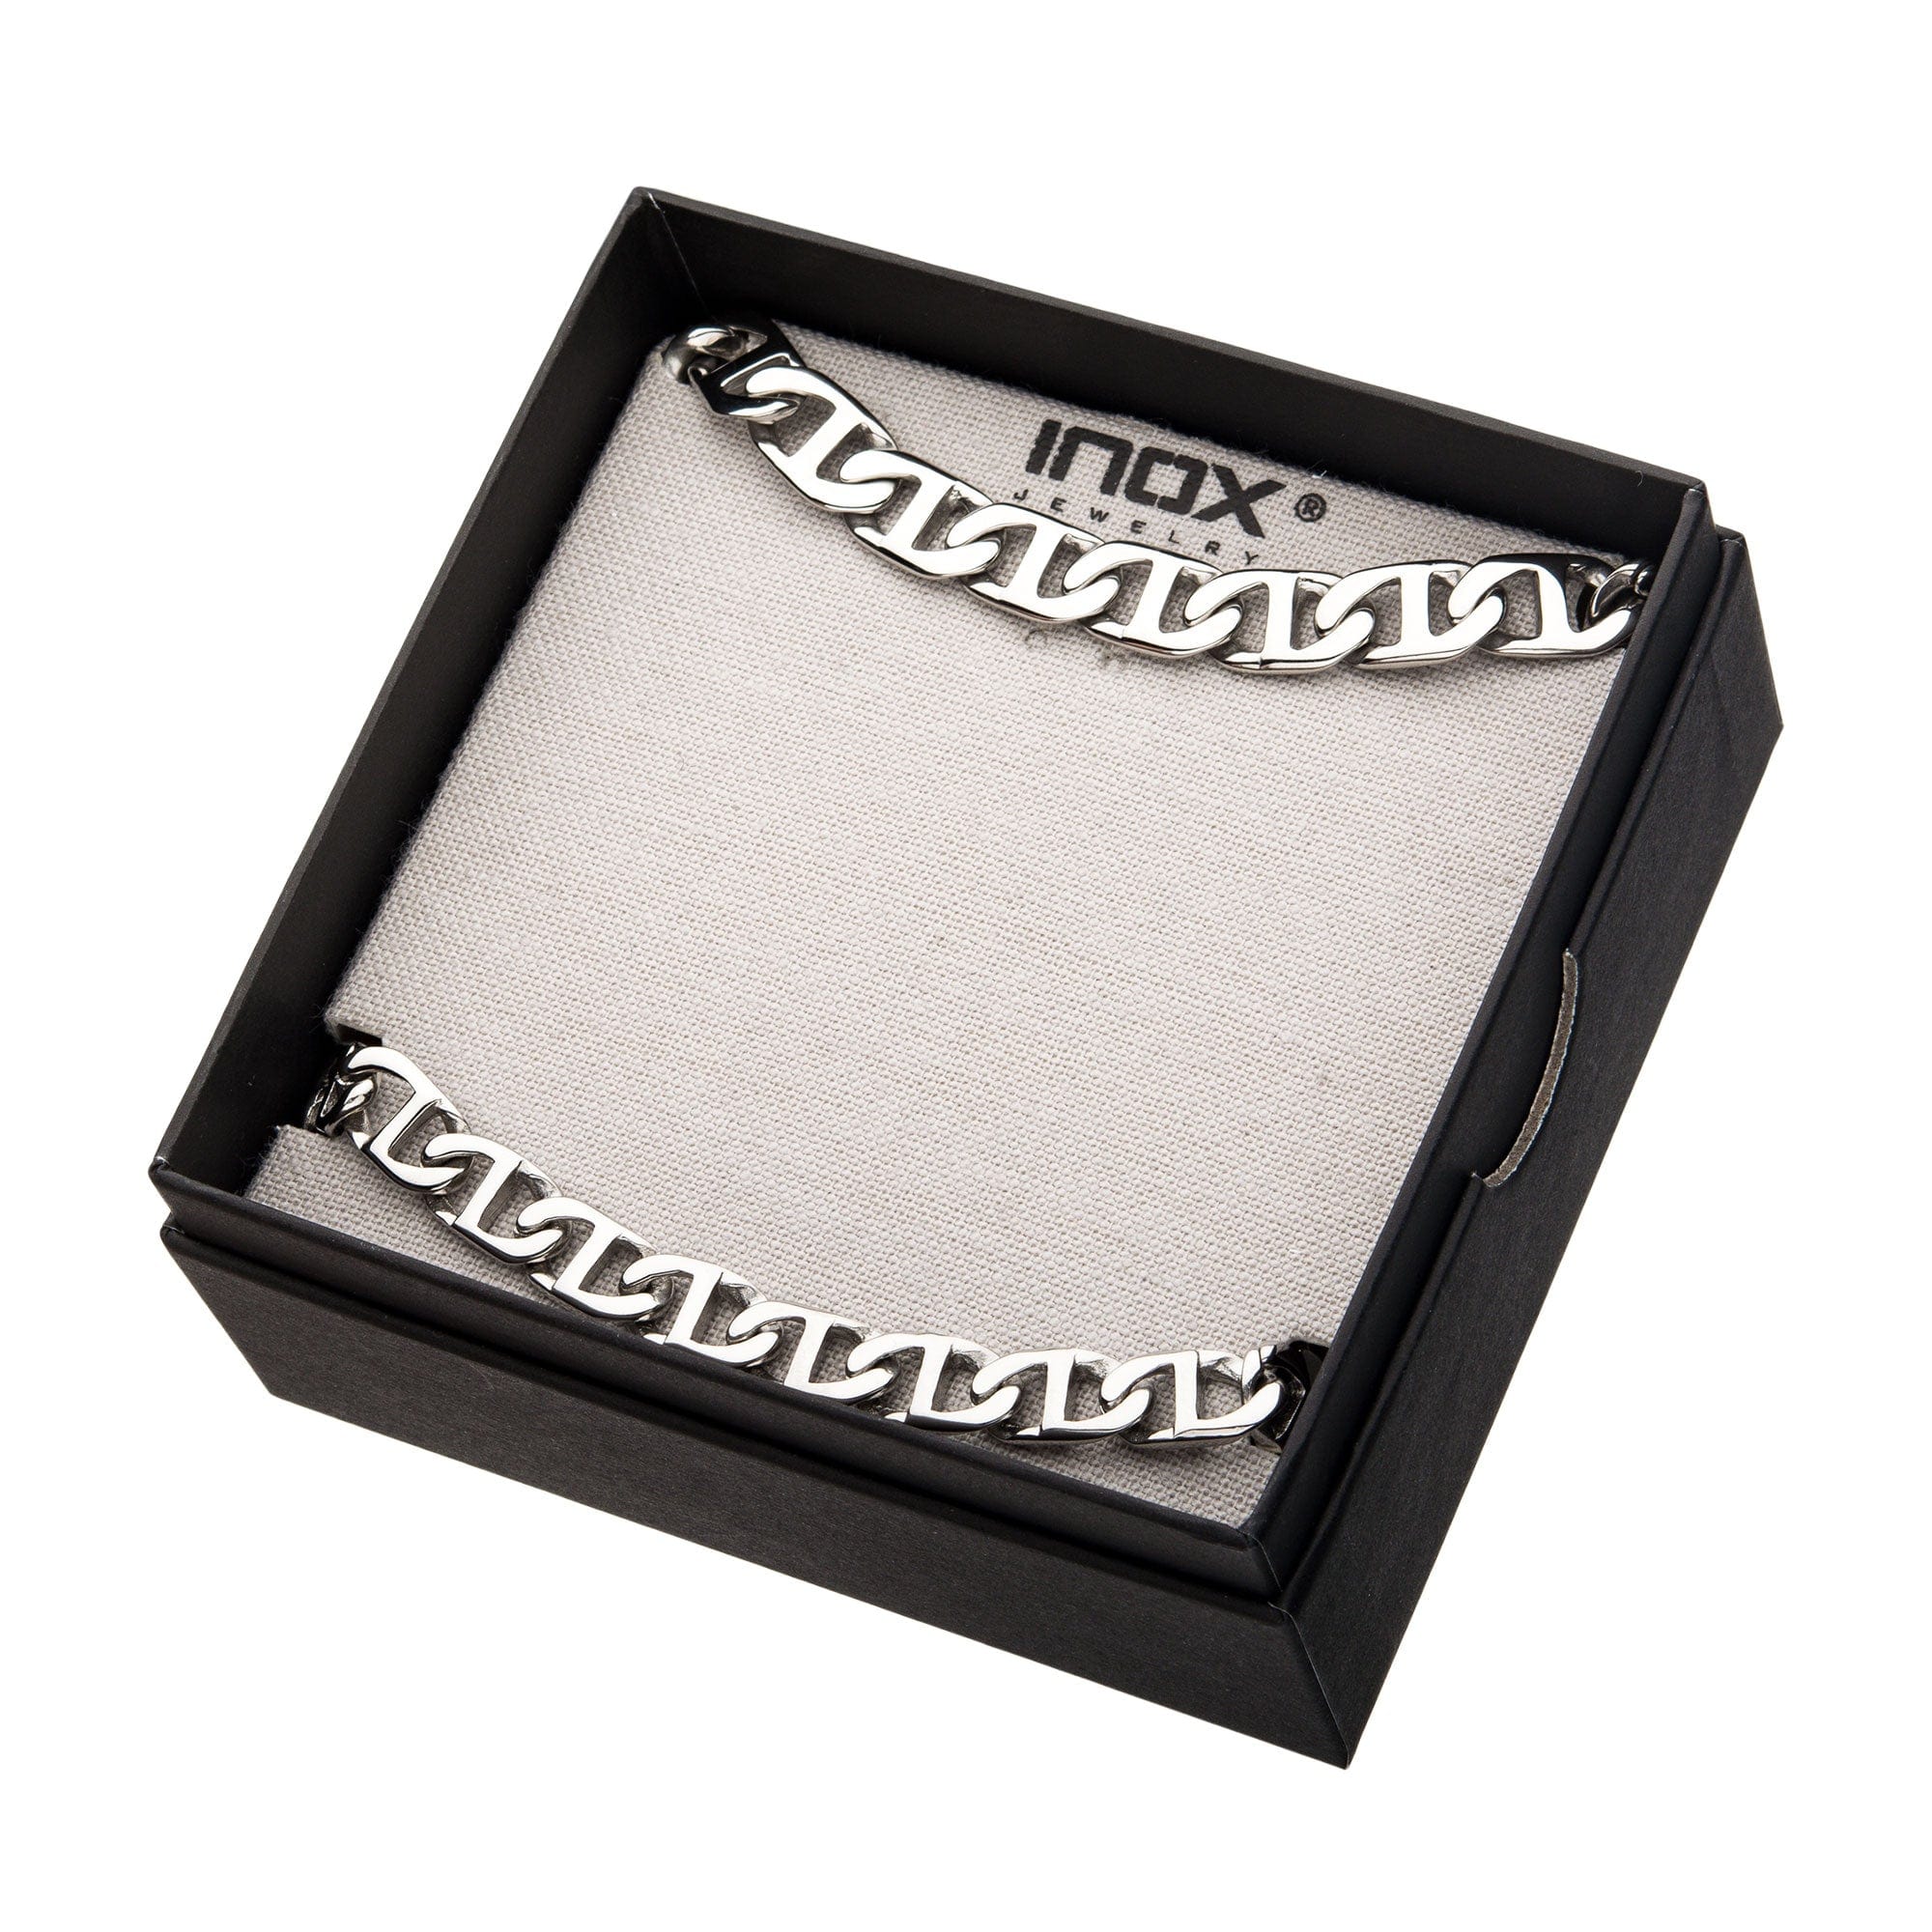 INOX JEWELRY Chains Silver Tone Stainless Steel 8mm Mariner Chain and Bracelet Set NSTC0108-SET